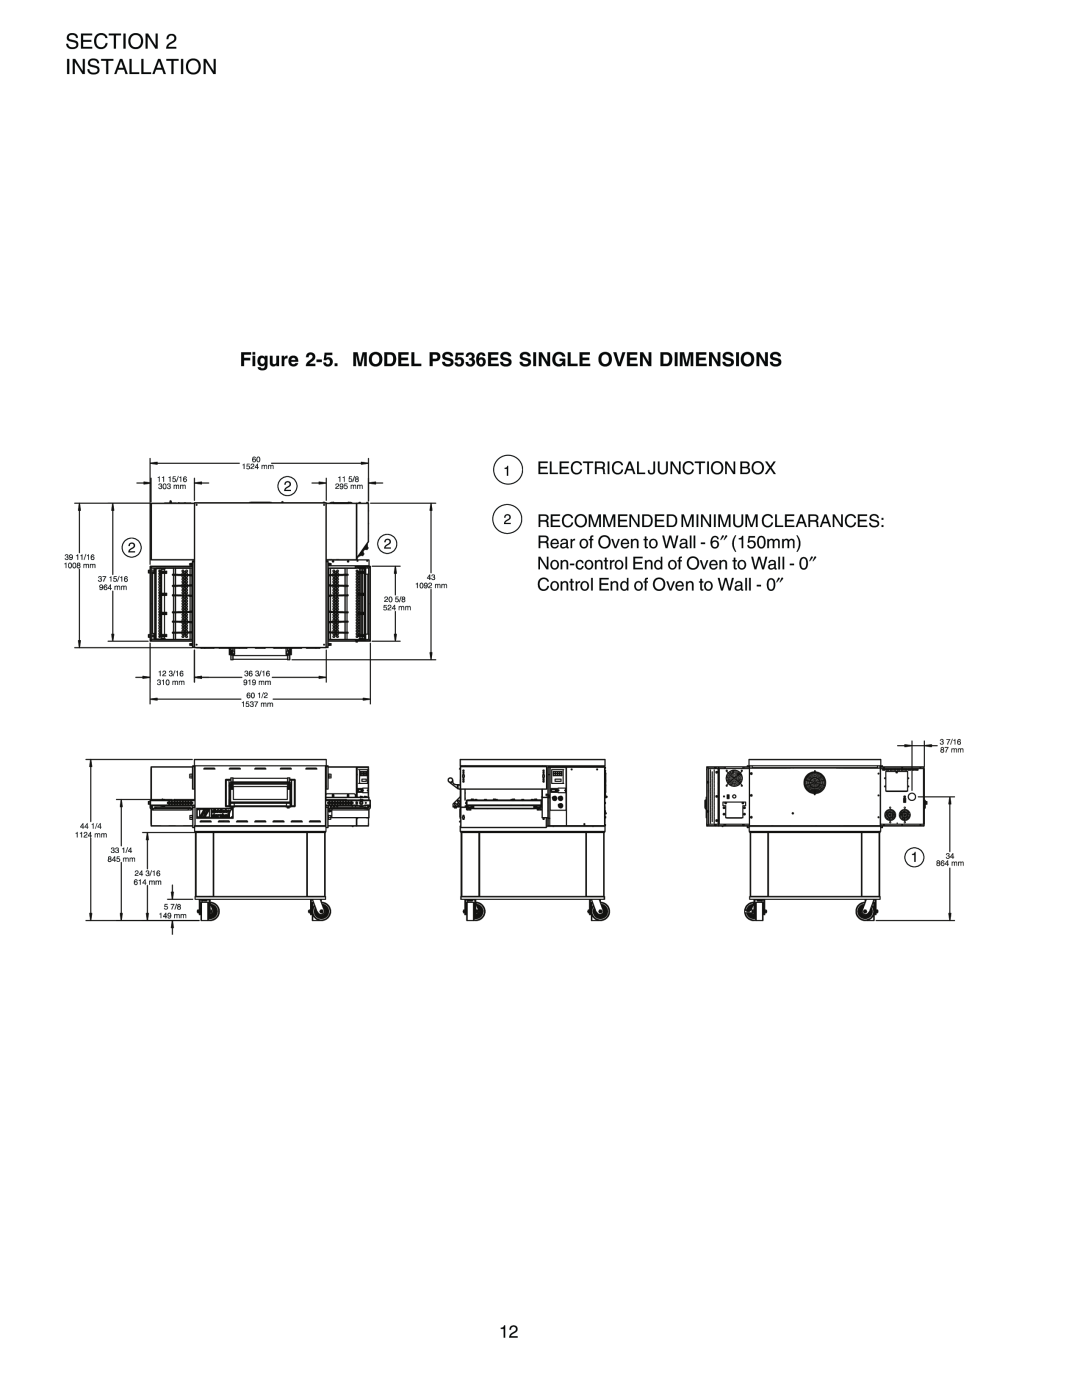 Middleby Marshall installation manual Installation, 5. MODEL PS536ES SINGLE OVEN DIMENSIONS 